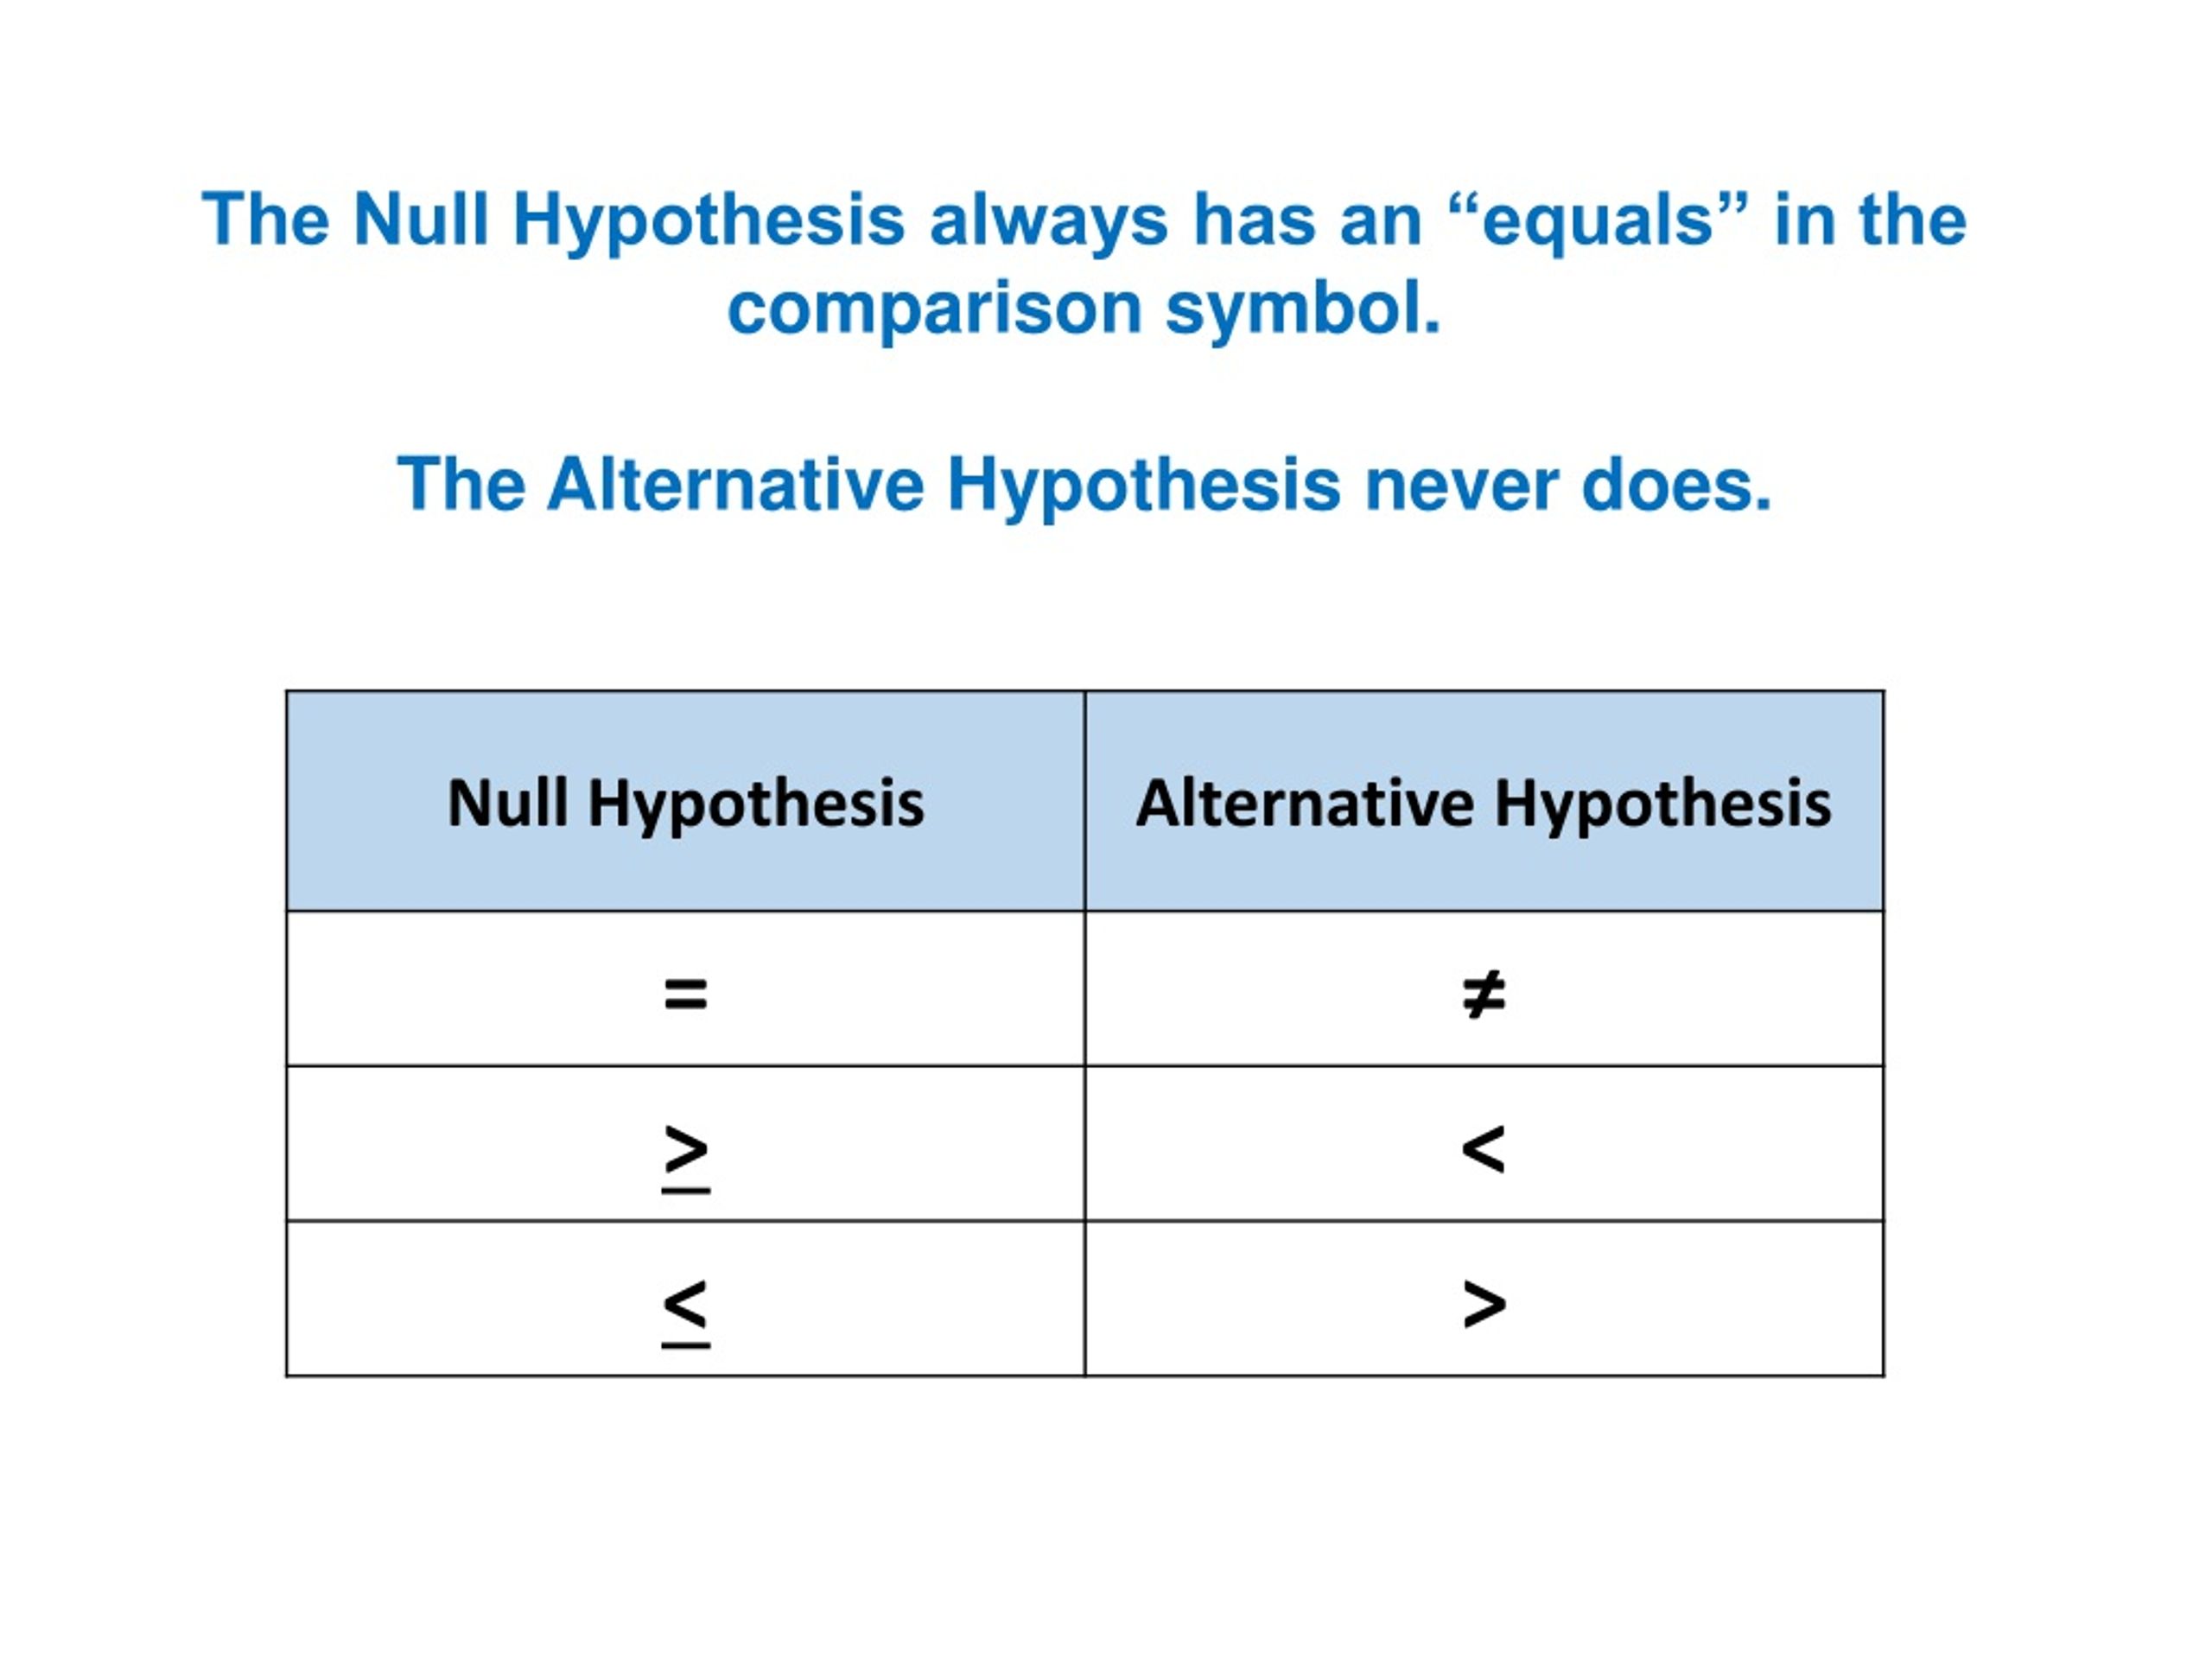 a null hypothesis must always include the equality sign